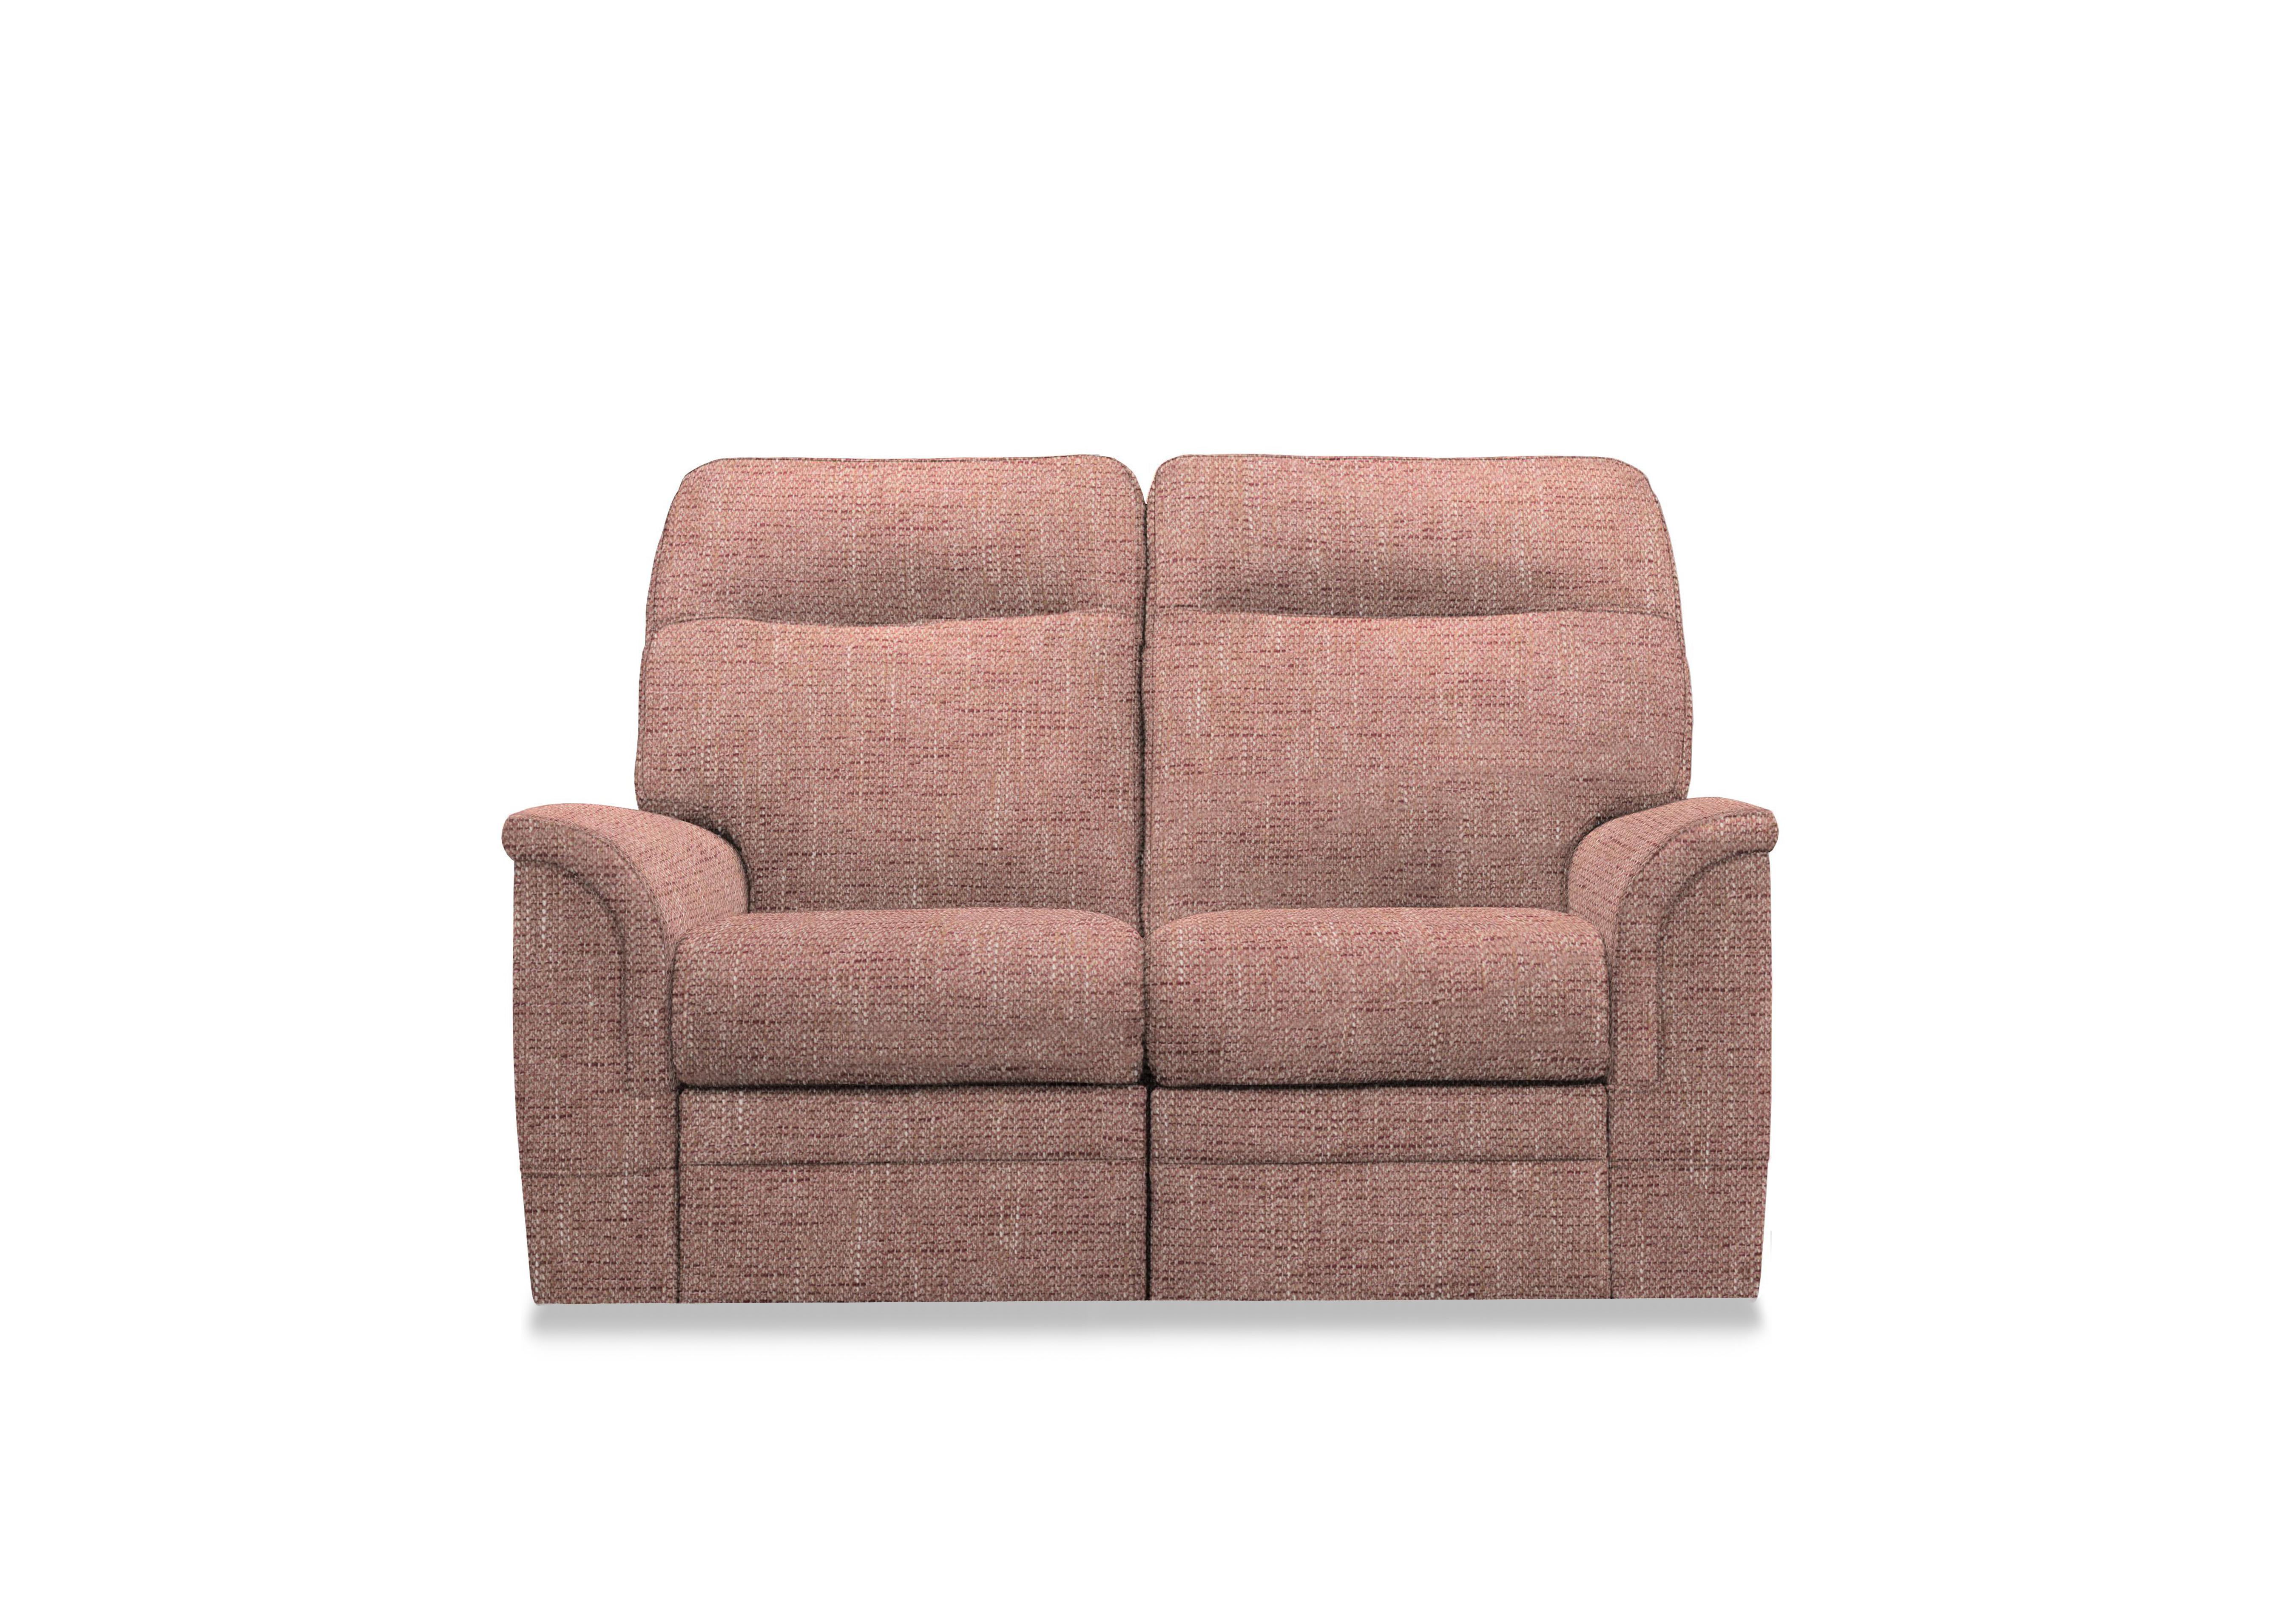 Hudson 23 Fabric 2 Seater Power Recliner Sofa with Power Headrests and Power Lumbar in Country Rose 001409-0003 on Furniture Village